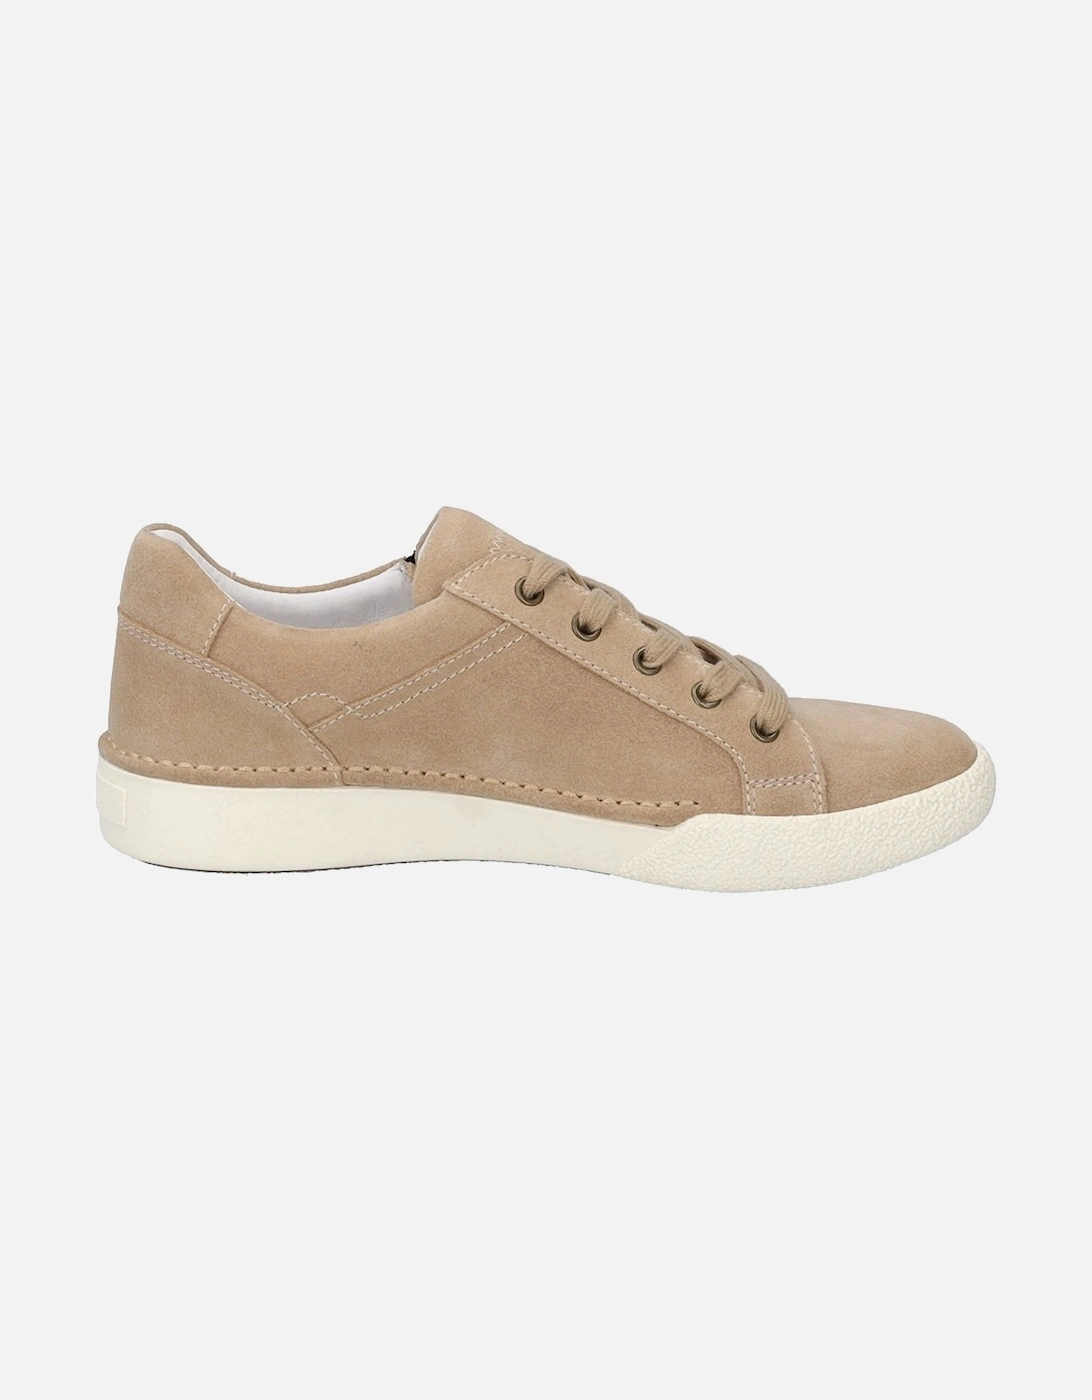 Claire 03 Womens Trainers